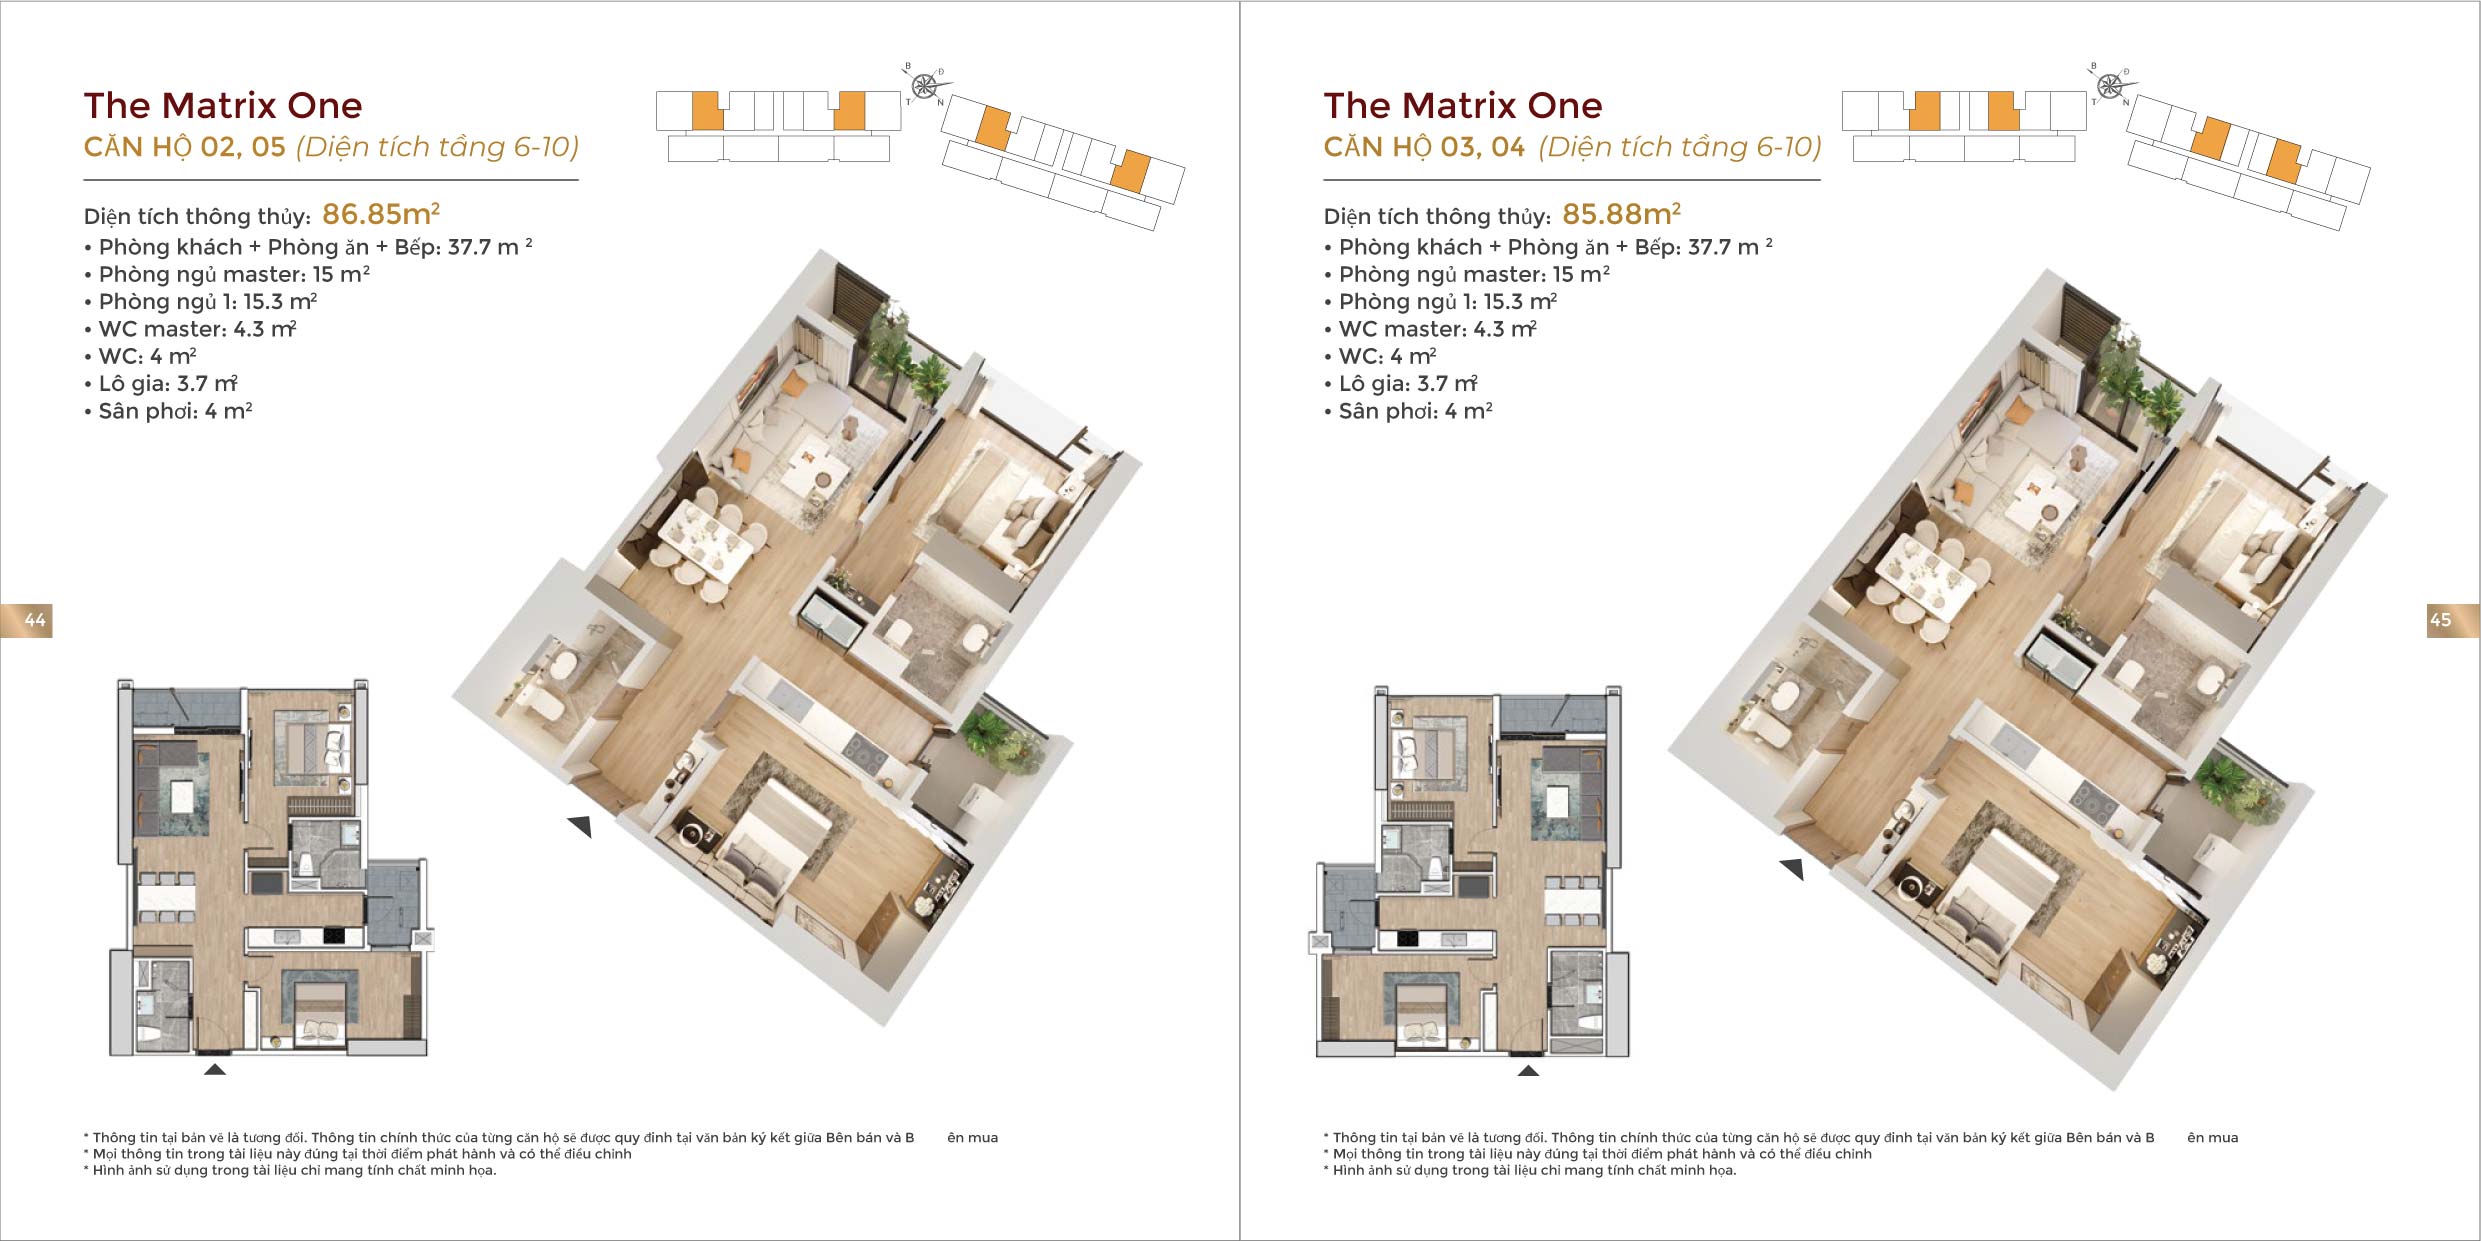 Sample design of 2 bedroom apartment in The Matrix One